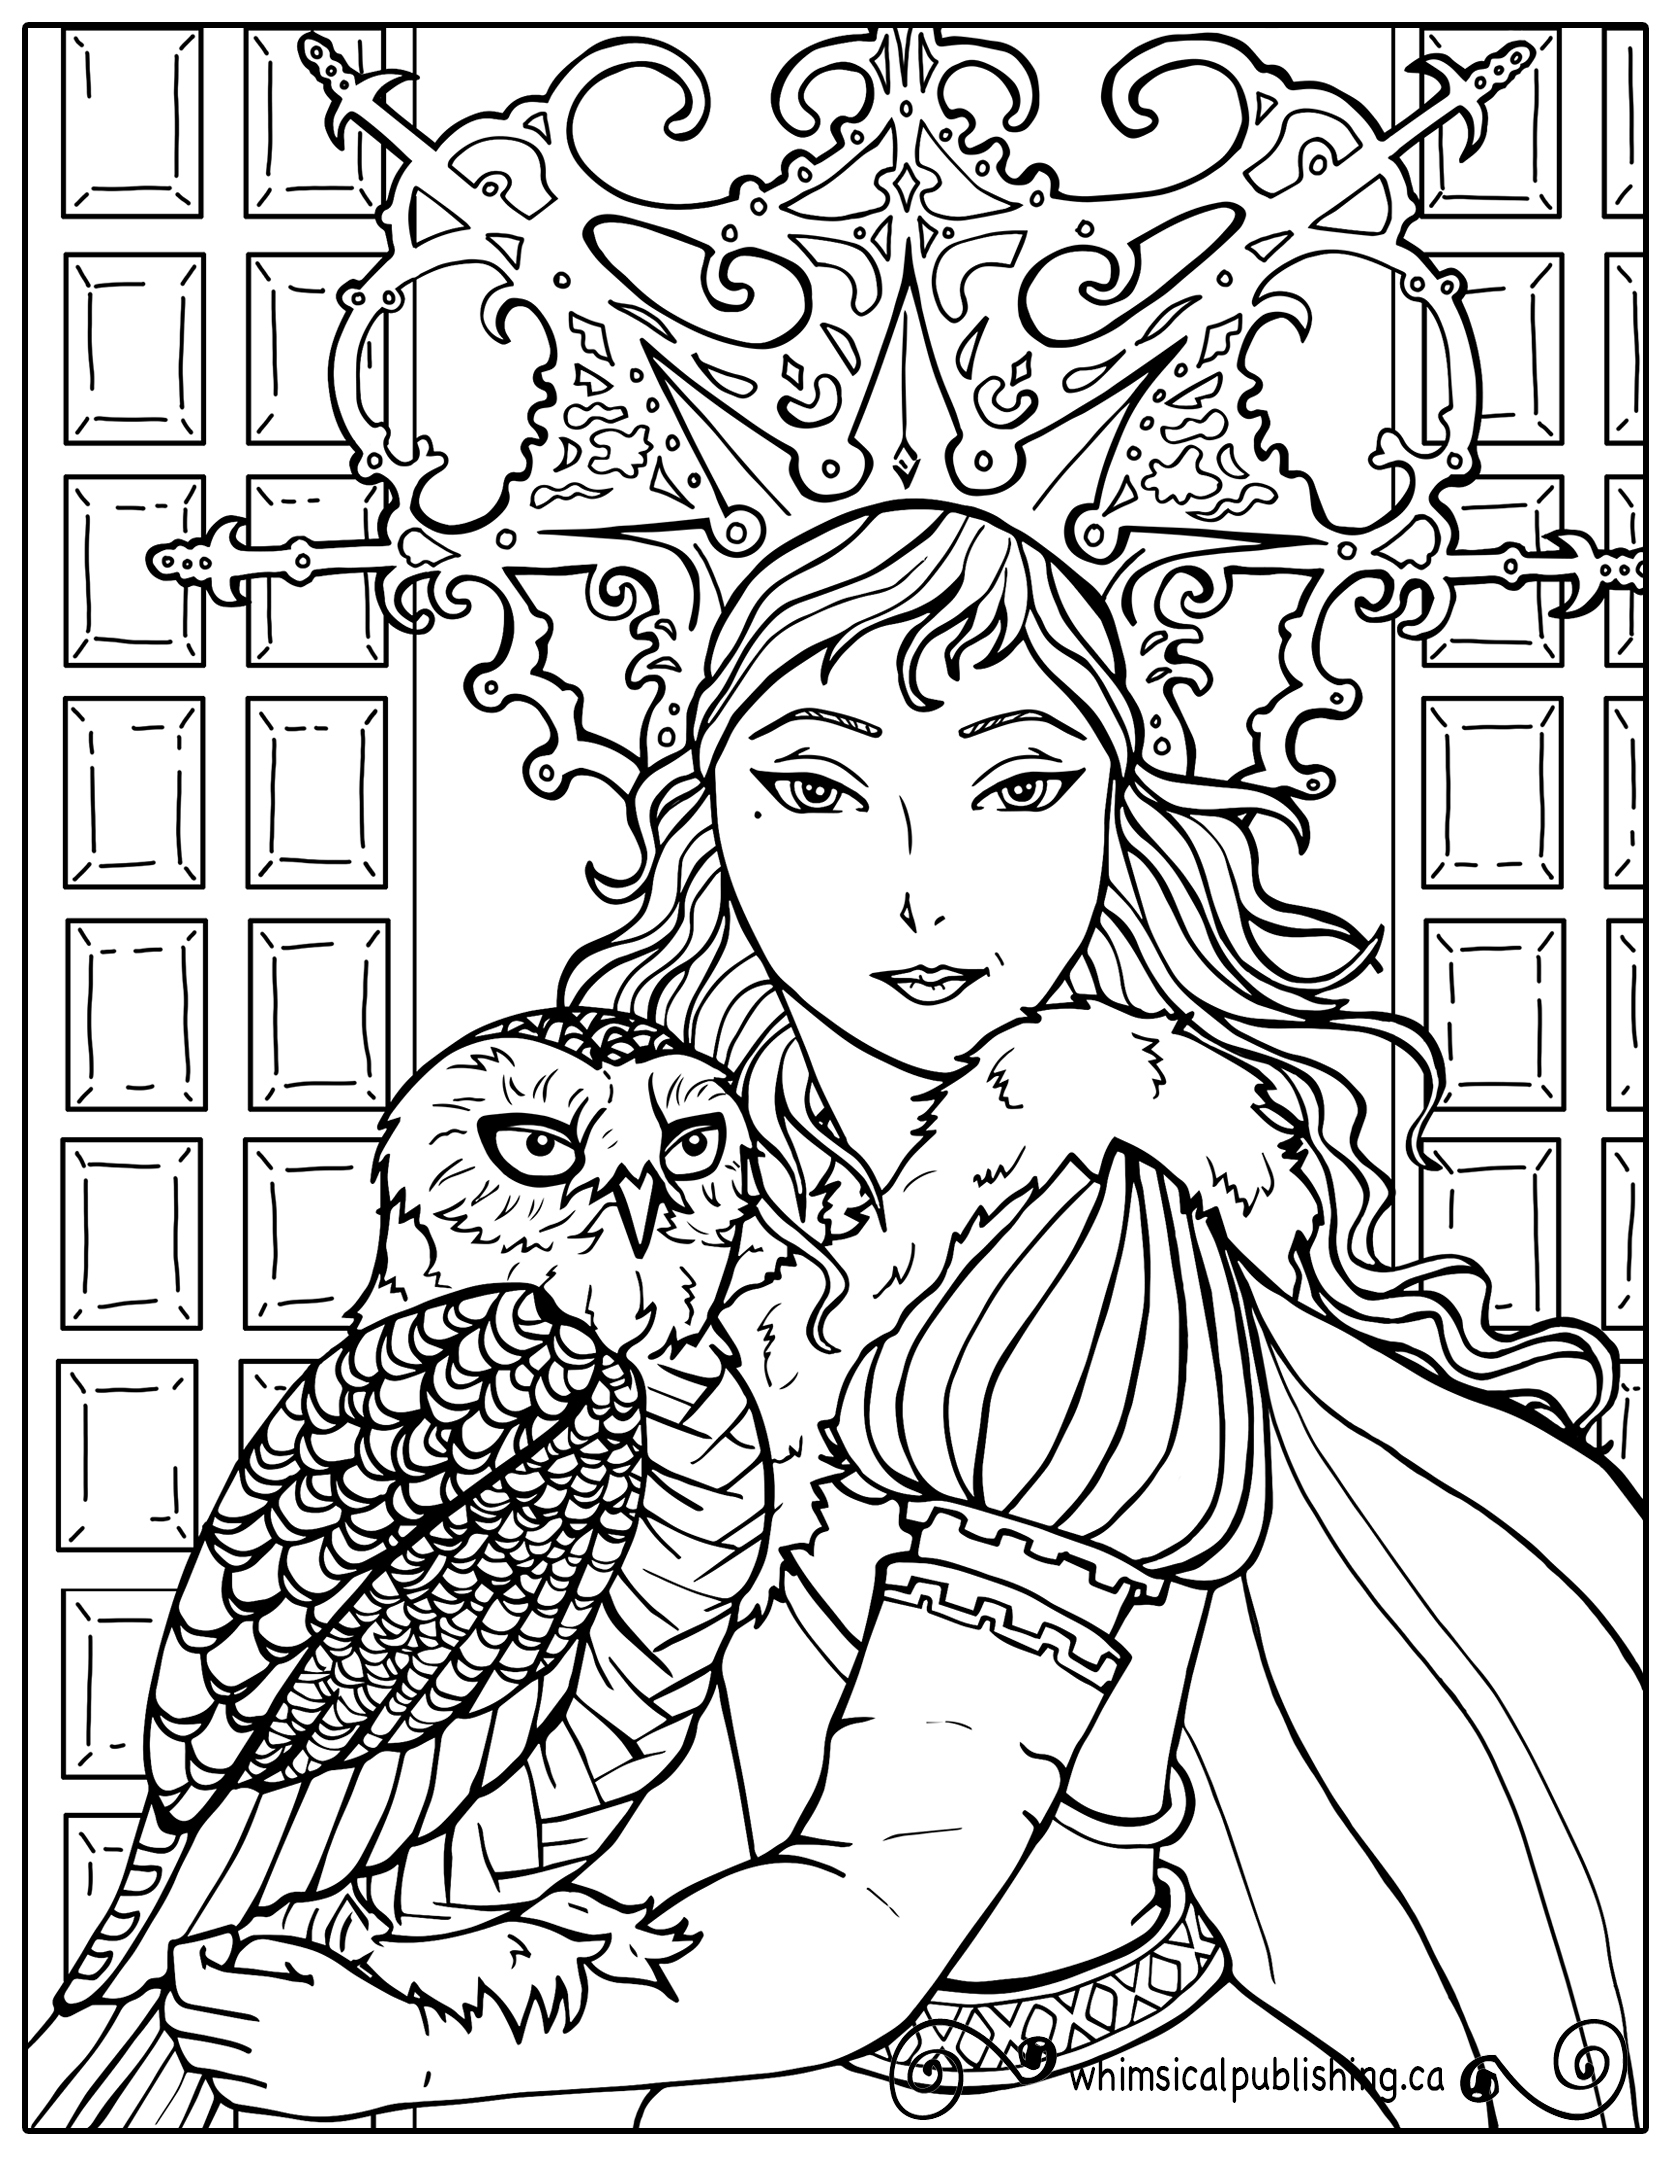 Download Free Colouring Pages